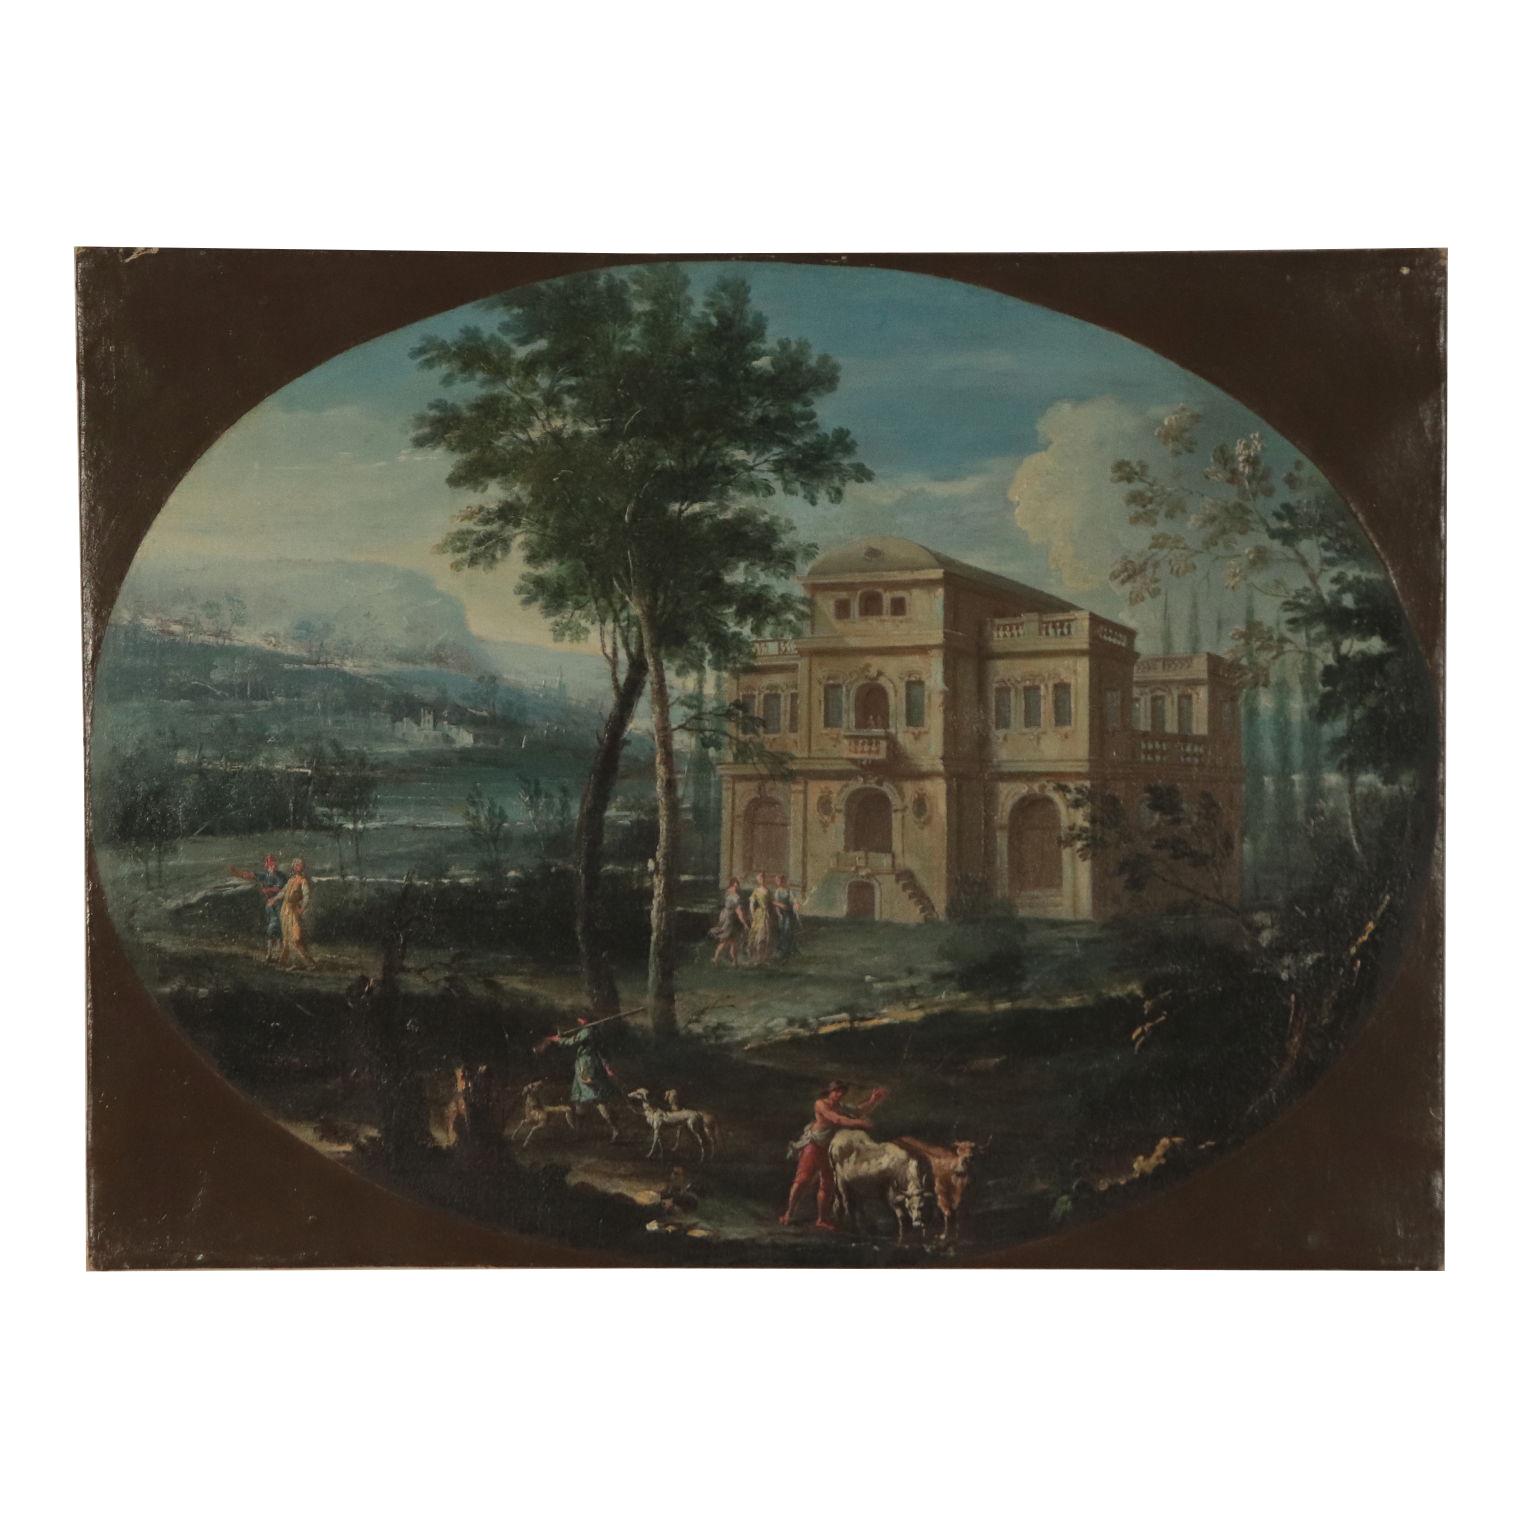 Unknown Landscape Painting - Landscape with Architecture and Figure, 18th Century. Allegory of Life in a Vill